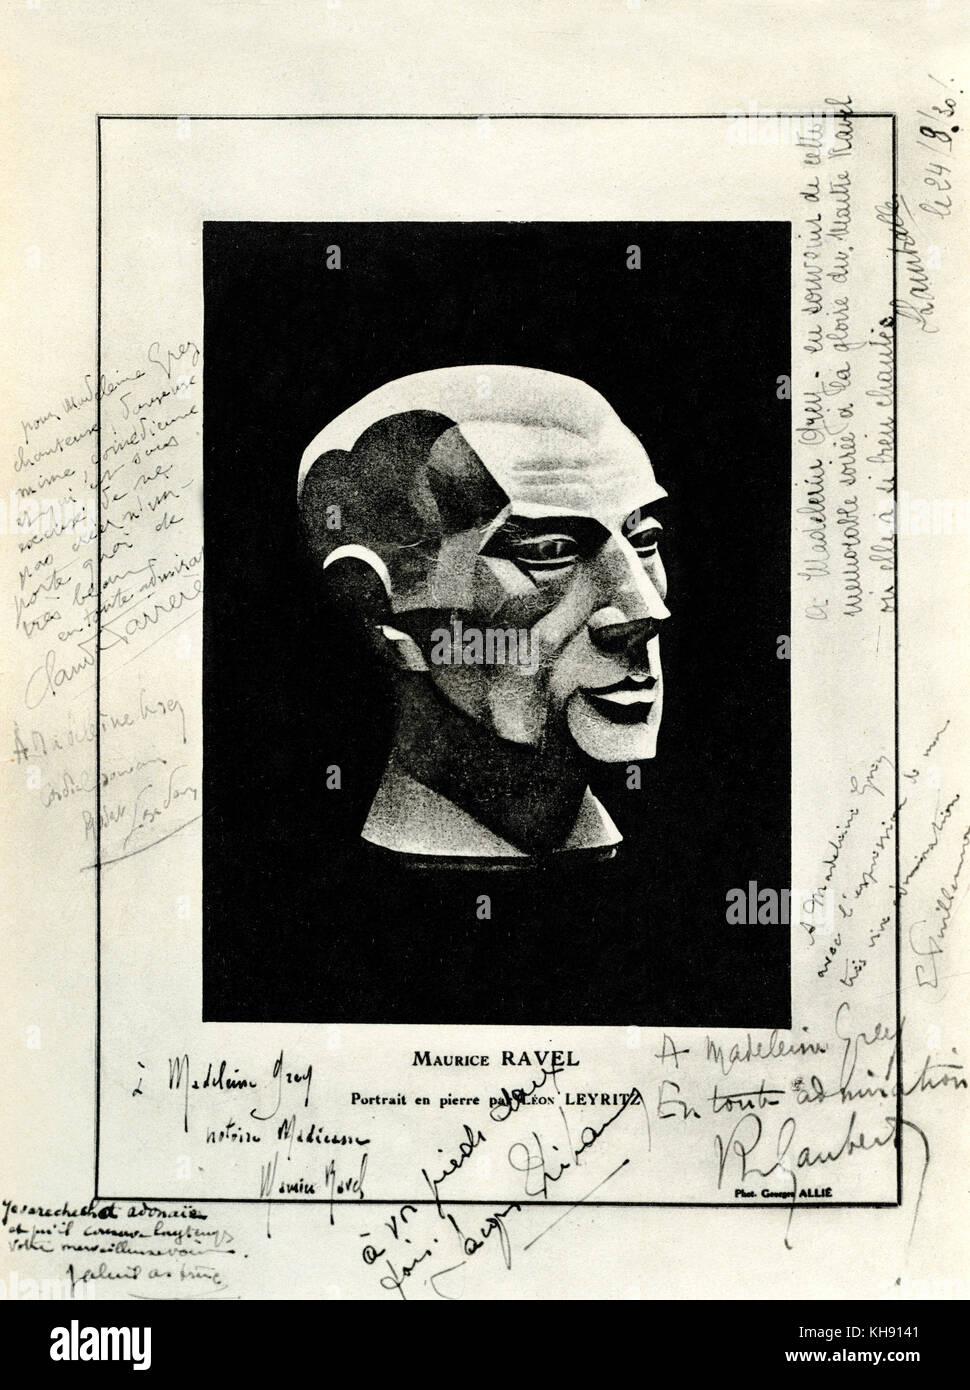 Bust of Maurice Ravel by Léon Leyritz. From programme of Festival Ravel, 24 August 1930. With signatures of Claude Farrère, Gabriel Astruc, Maurice Ravel, Jacques Thibaud, Emile Vuillermoz, Ph. Gaubert, R. Casadesus and Lucienne Lamballe. MR: French composer, 17 March 1875 - 28 December 1937. LL: French sculptor, 1888 - 1976. Stock Photo